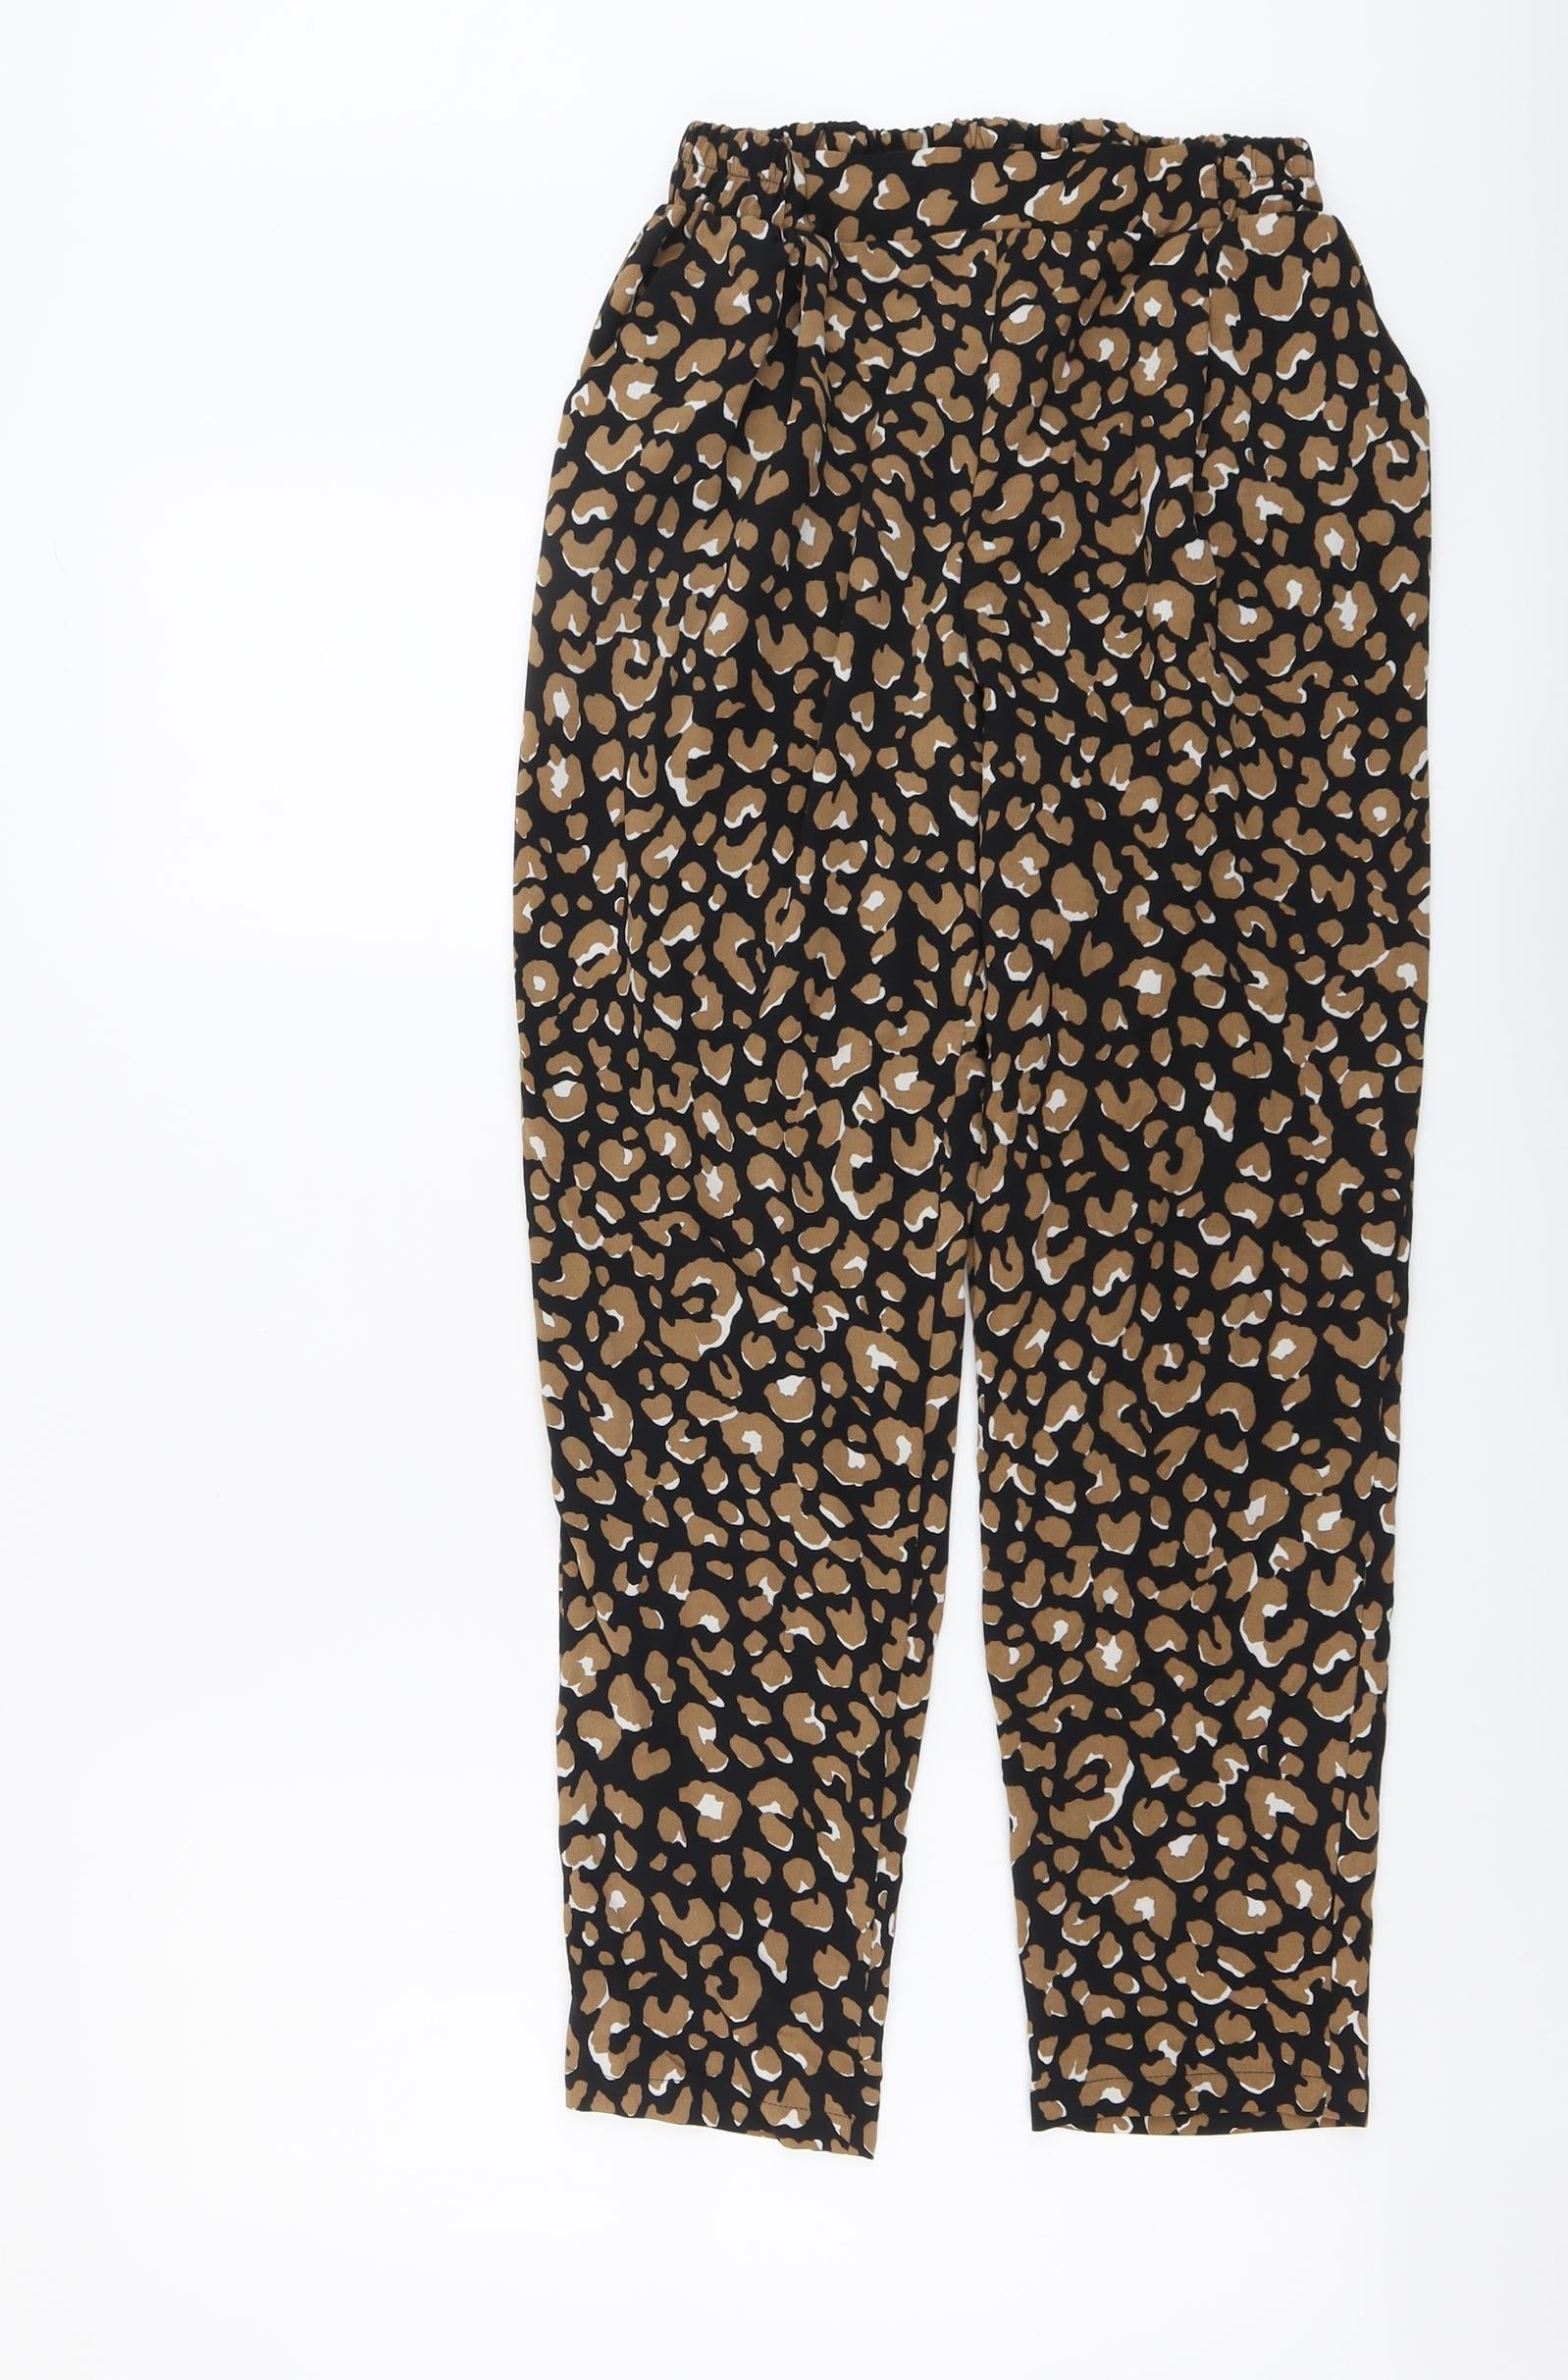 Primark Leopard Print Stretchy Flared Trousers Elasticated Waist - S | eBay